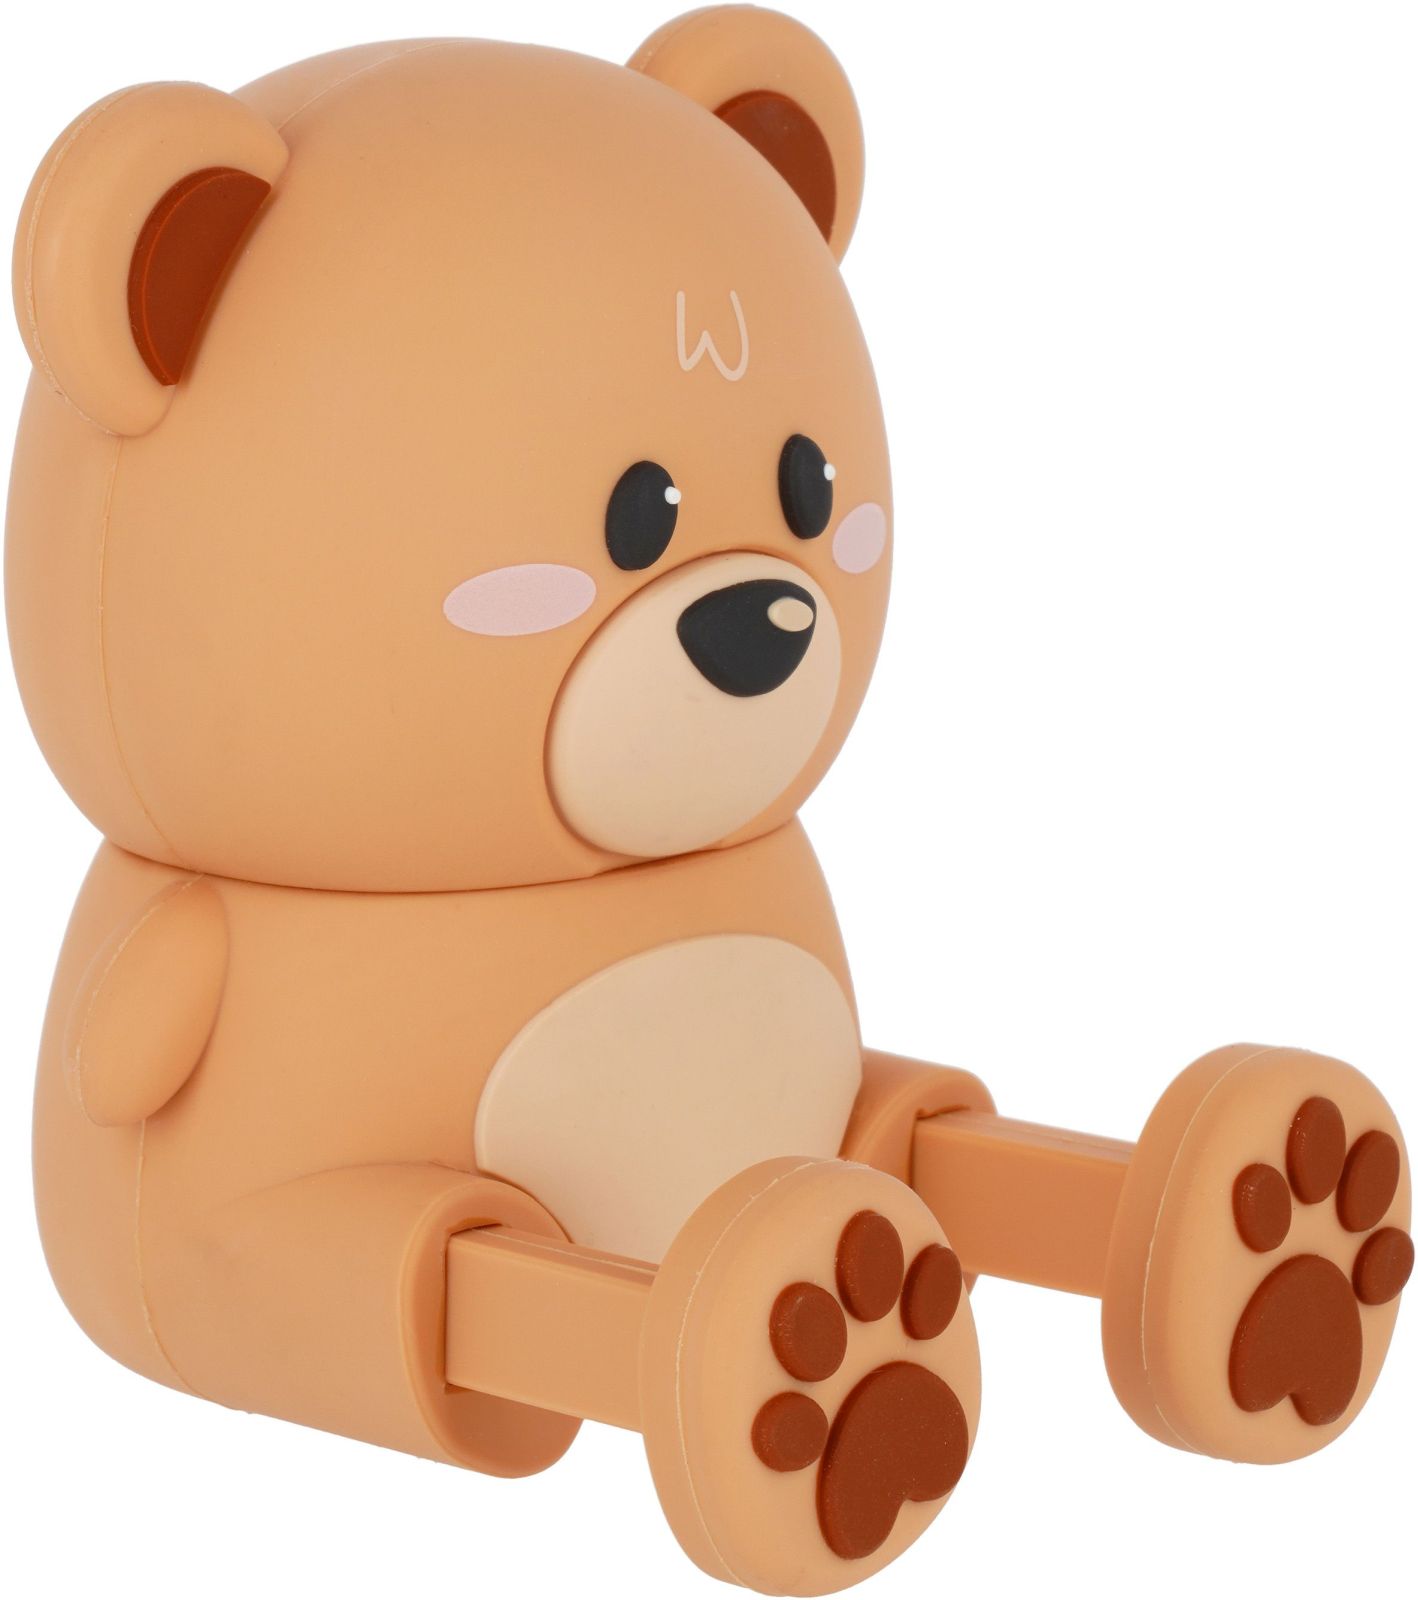 Legami The Sound Of Cuteness - Wireless Speaker With Stand - Teddy Bear